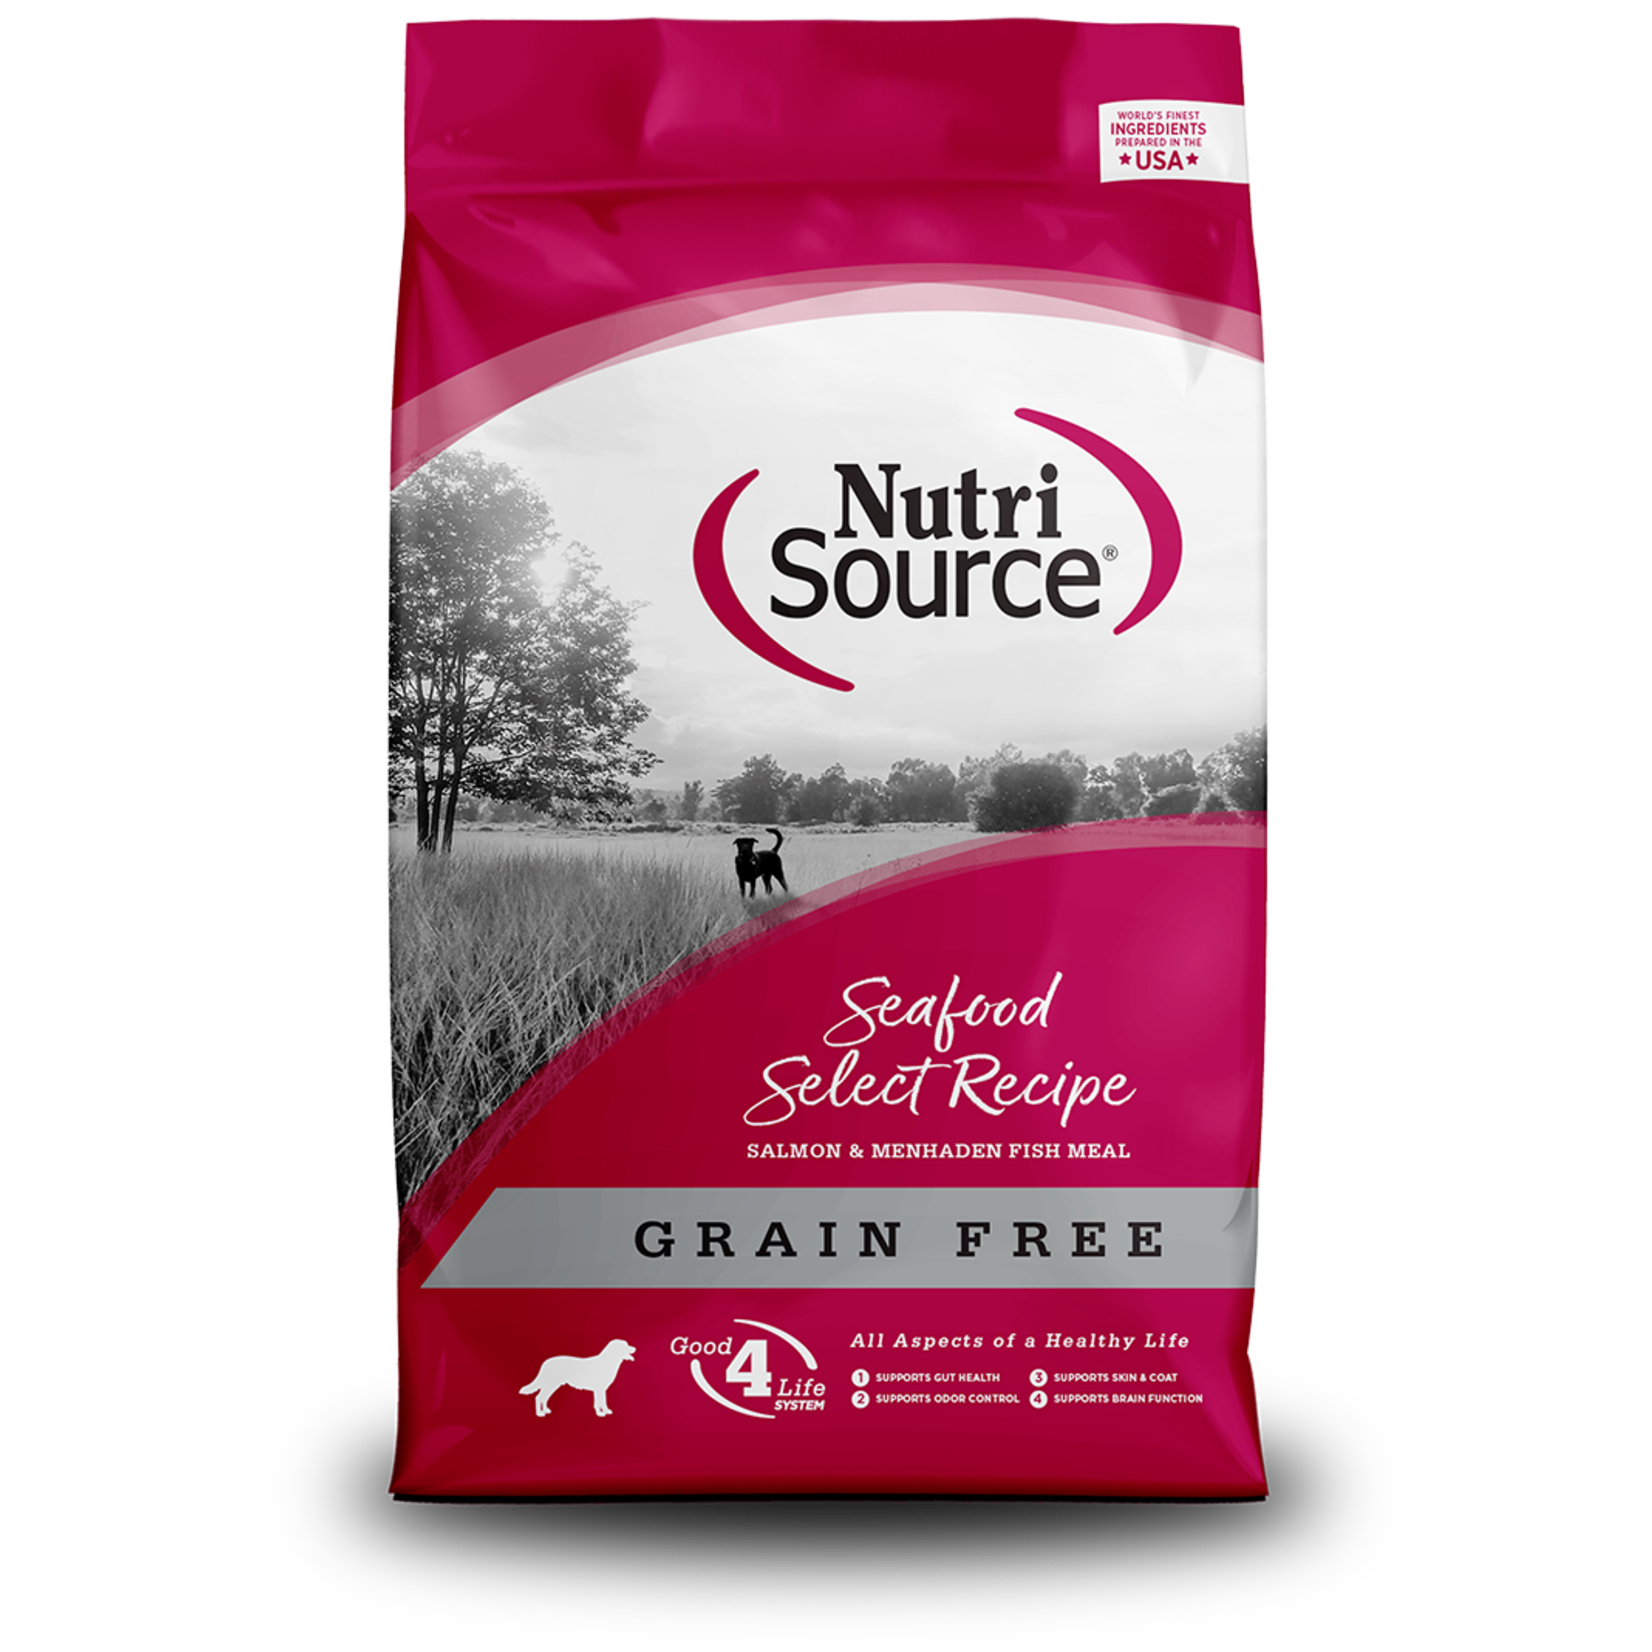 NutriSource NutriSource Dry Dog Food Seafood Select Recipe Salmon & Menhaden Fish Meal Grain Free